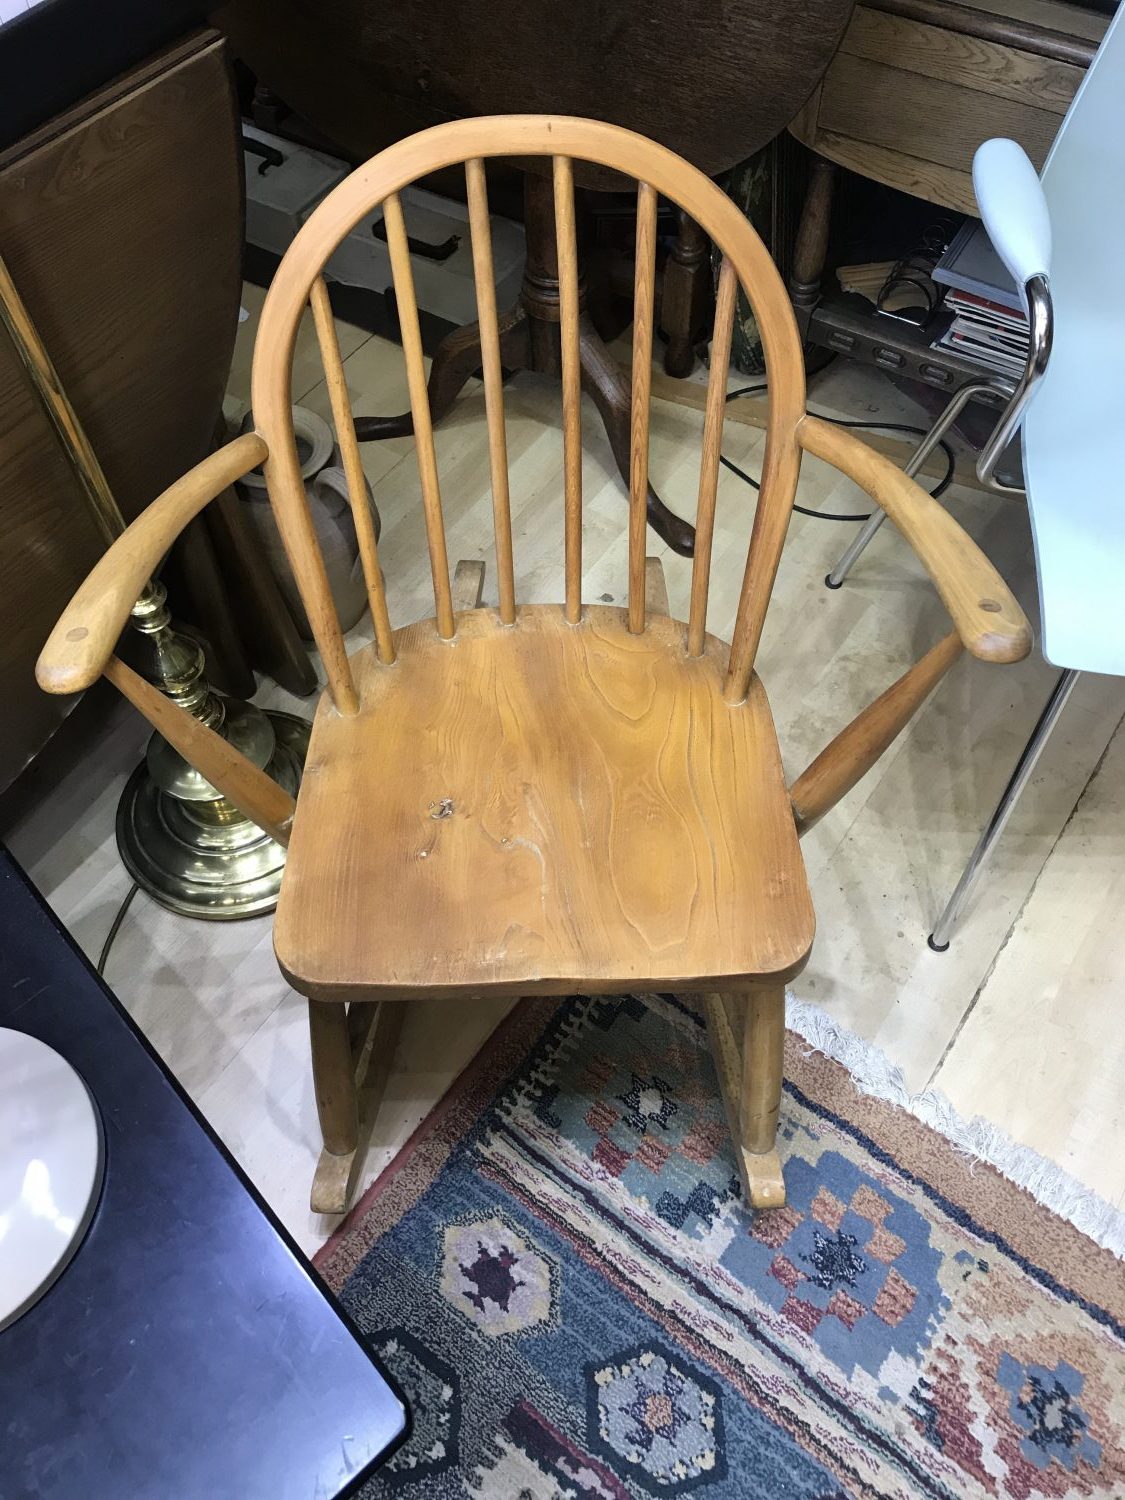 ercol childs rocking chair